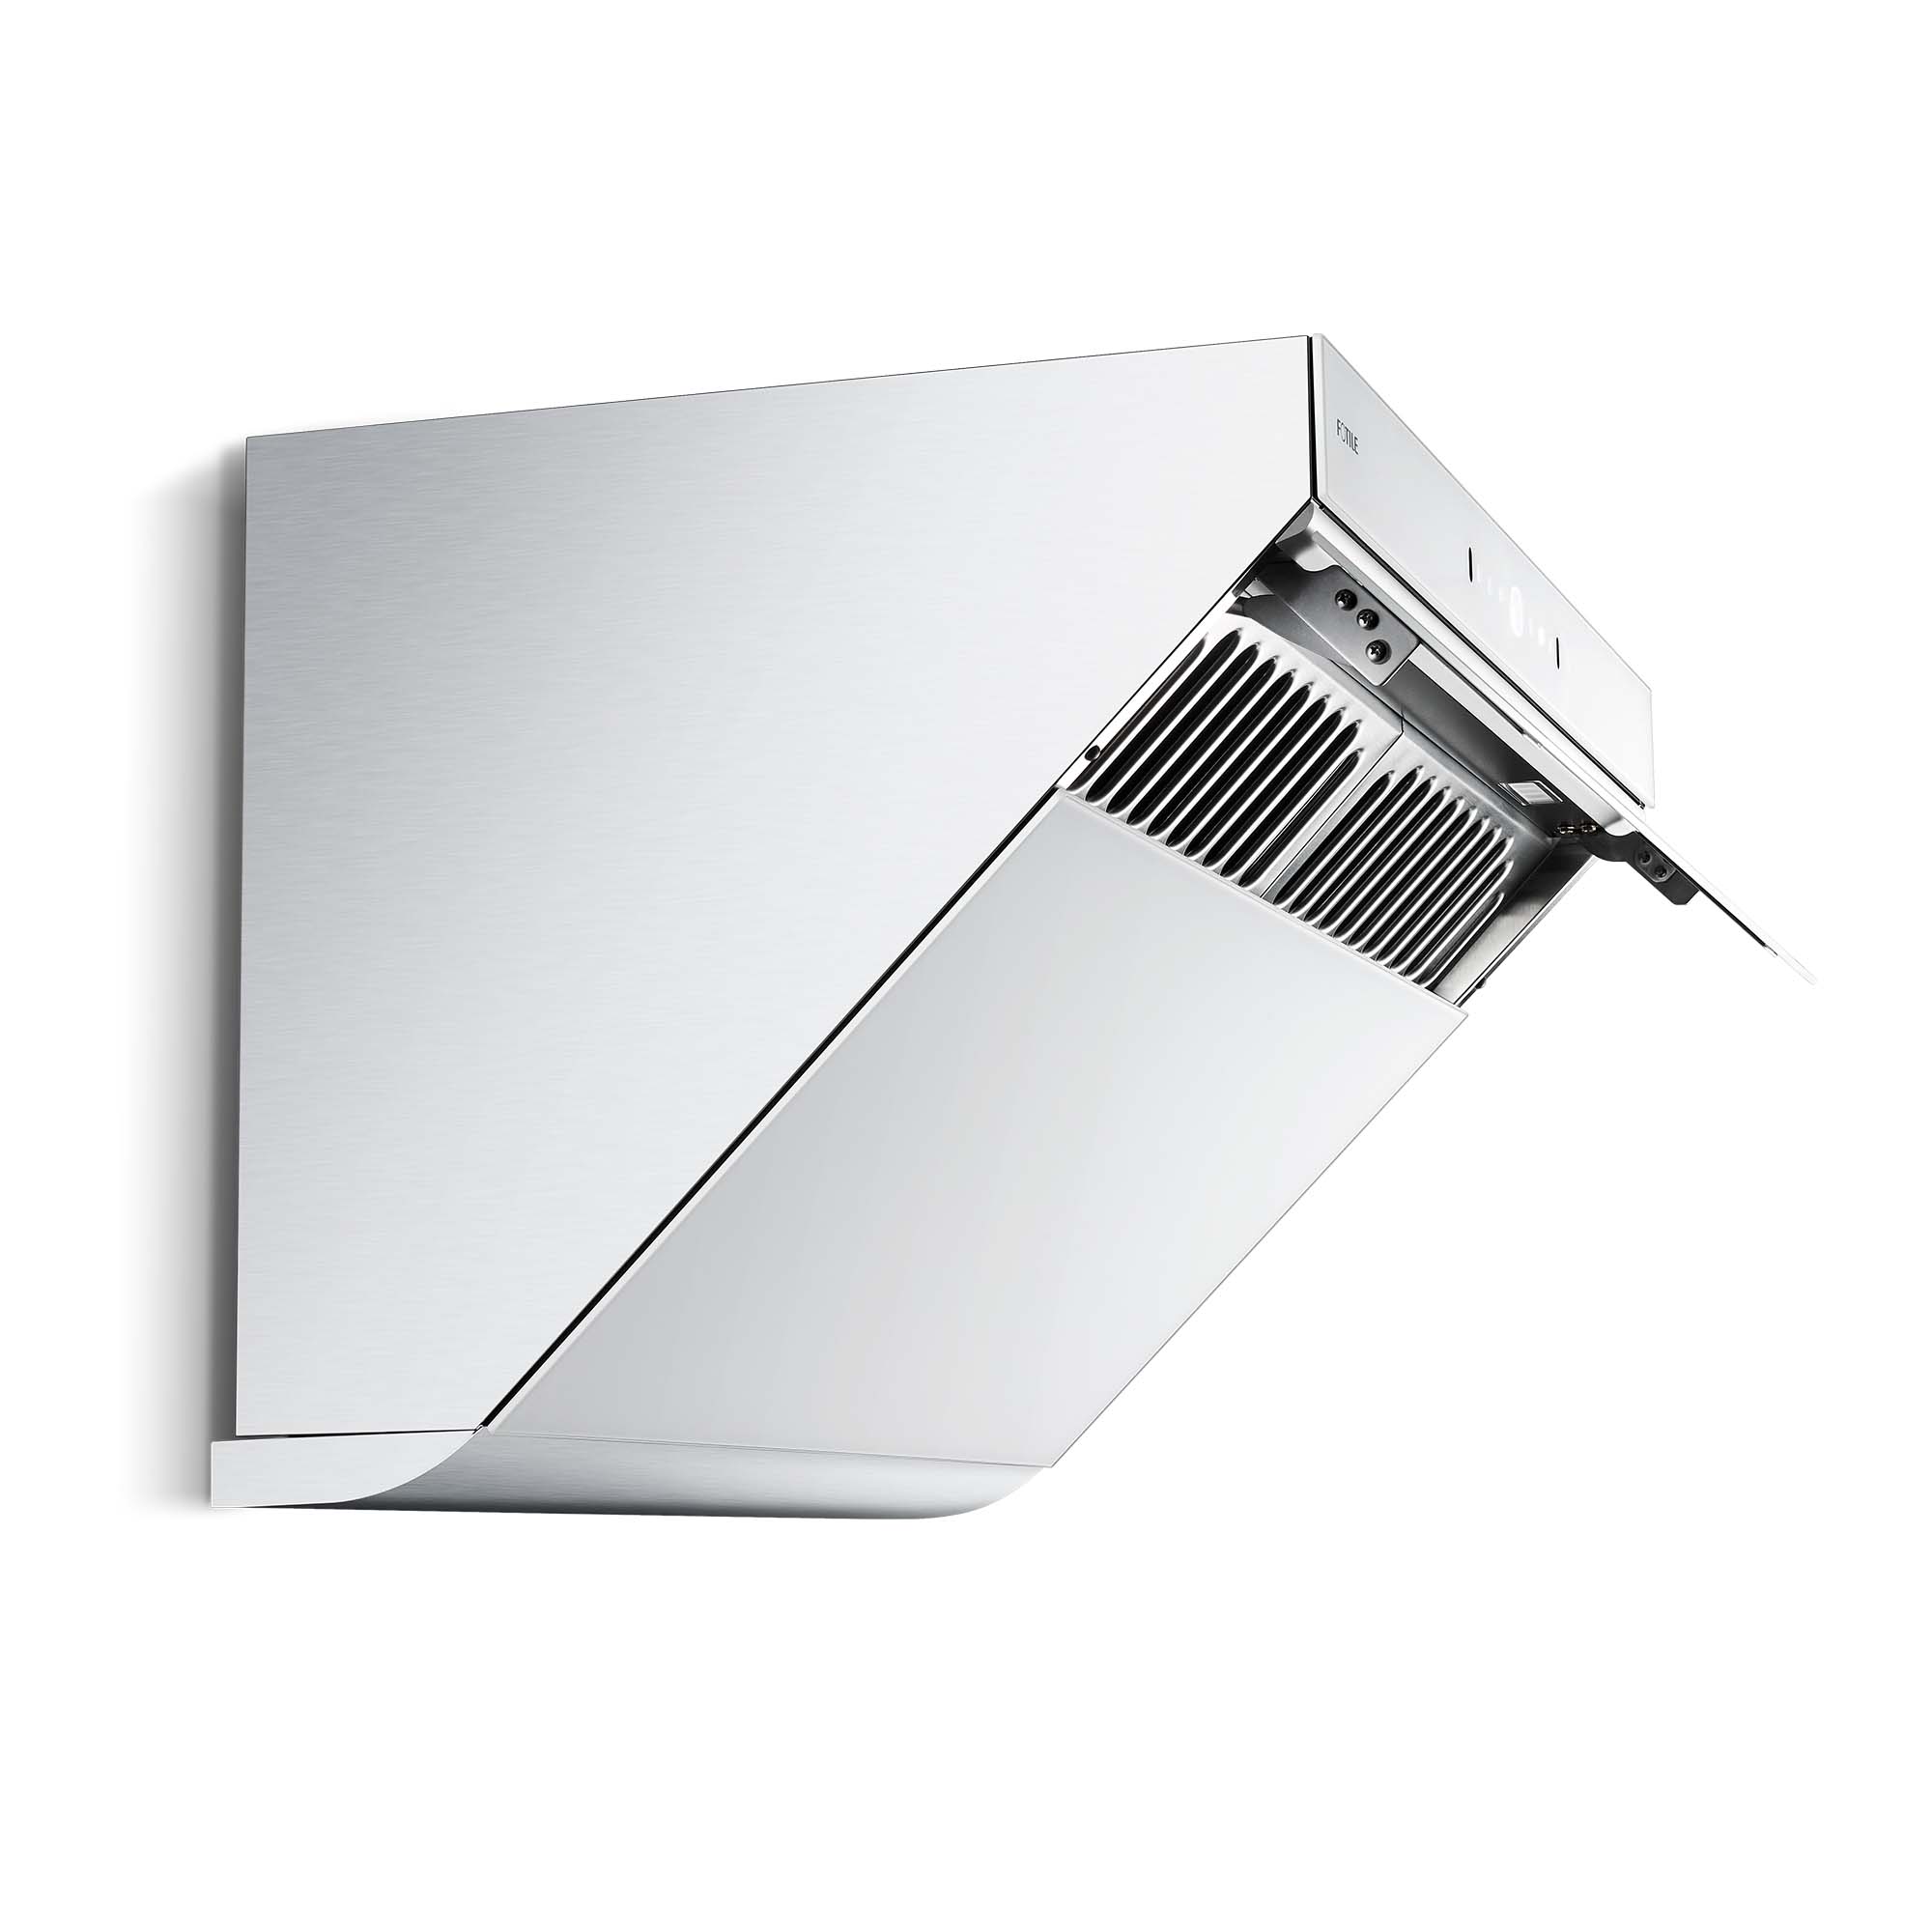  FOTILE JQG7505 30” Under-Cabinet or Wall-Mount Range Hood, Dual DC-Motor, Slant Vent Design, Hands Free On and Off, Touchscreen  with 4 Speed Level